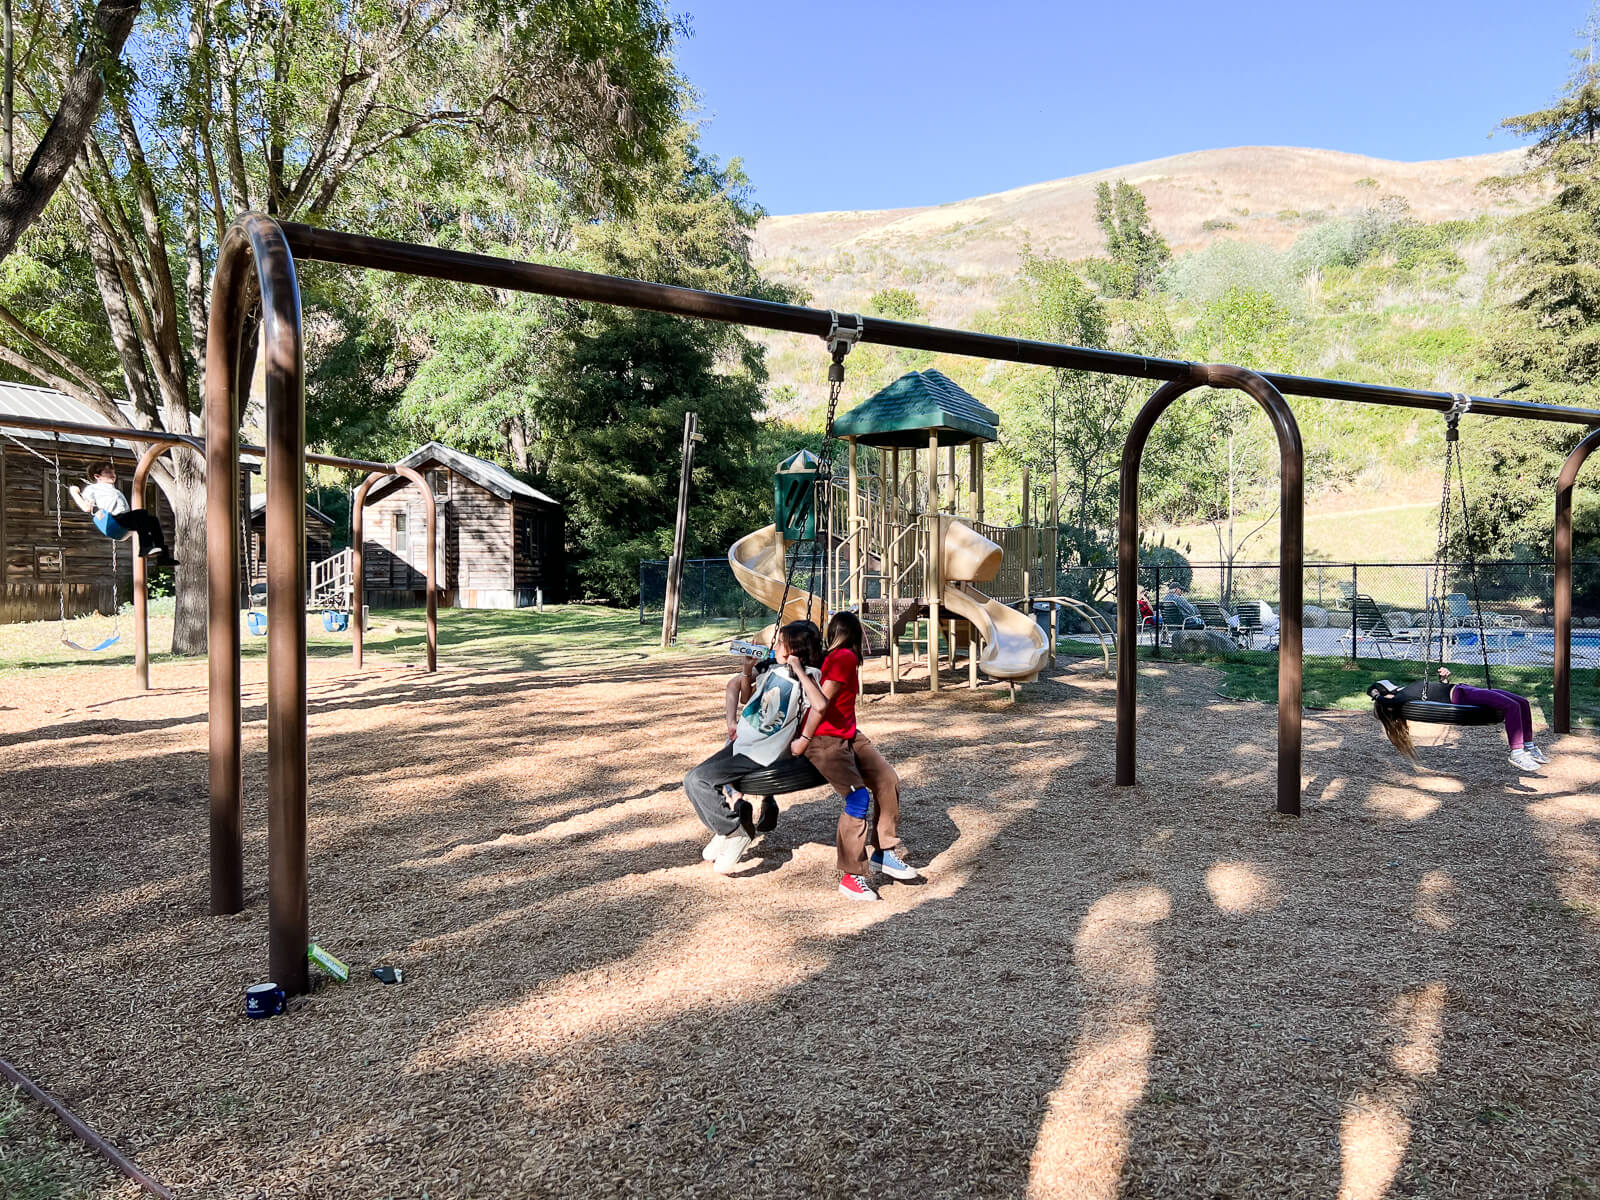 Kids play on a tire swing at the playground of the El Capitan Canyon resort. 